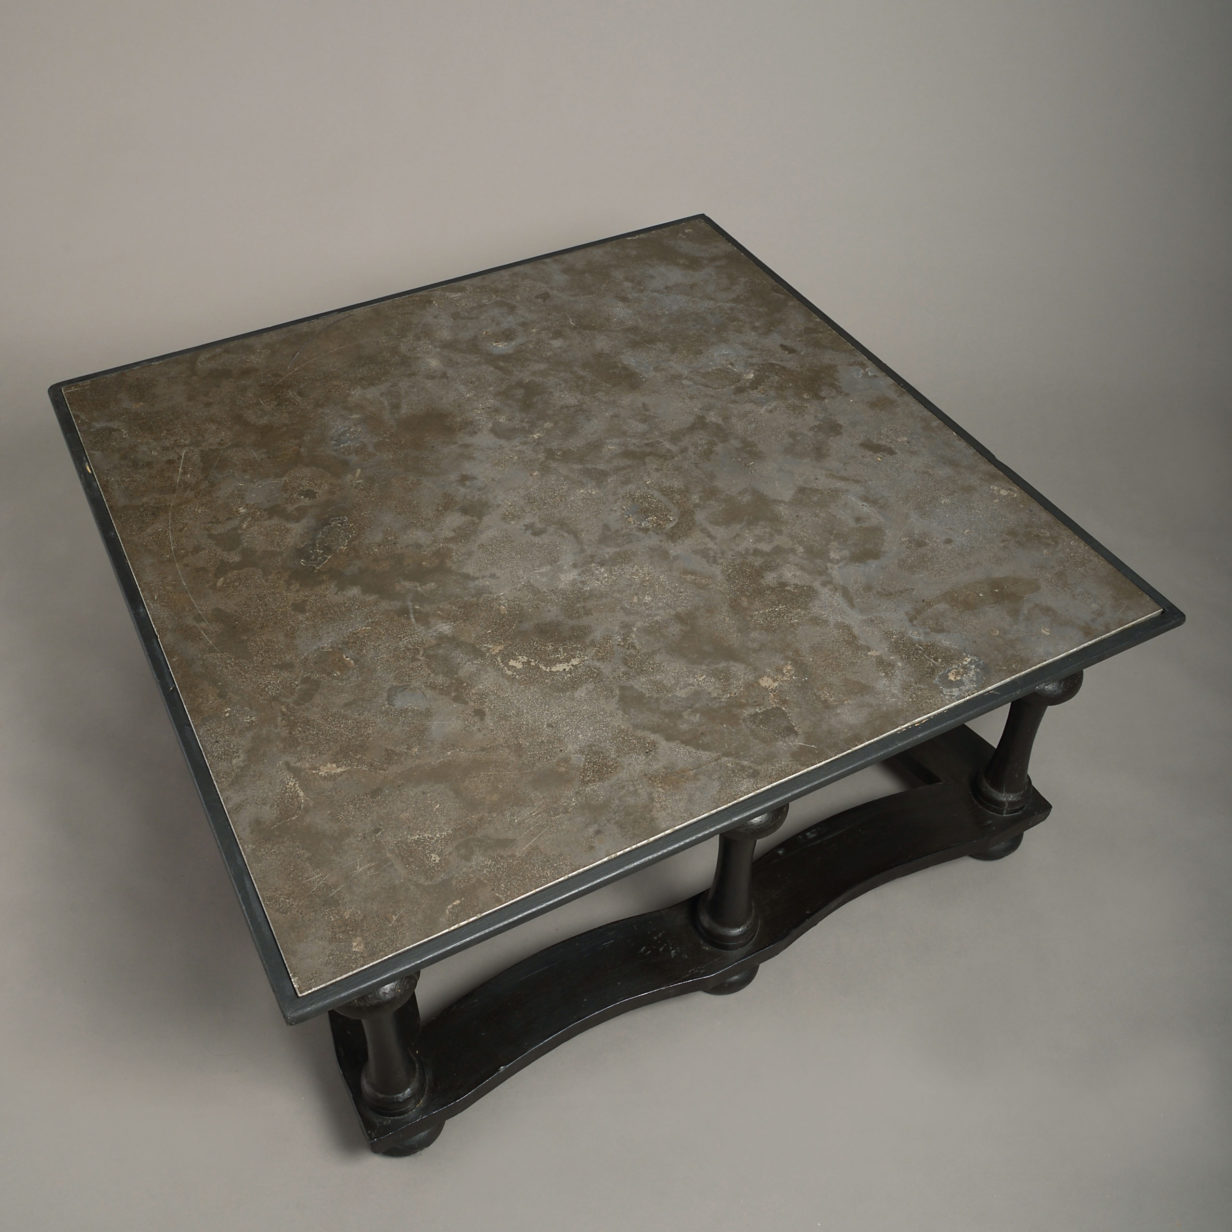 A Baroque Style Low or Coffee Table